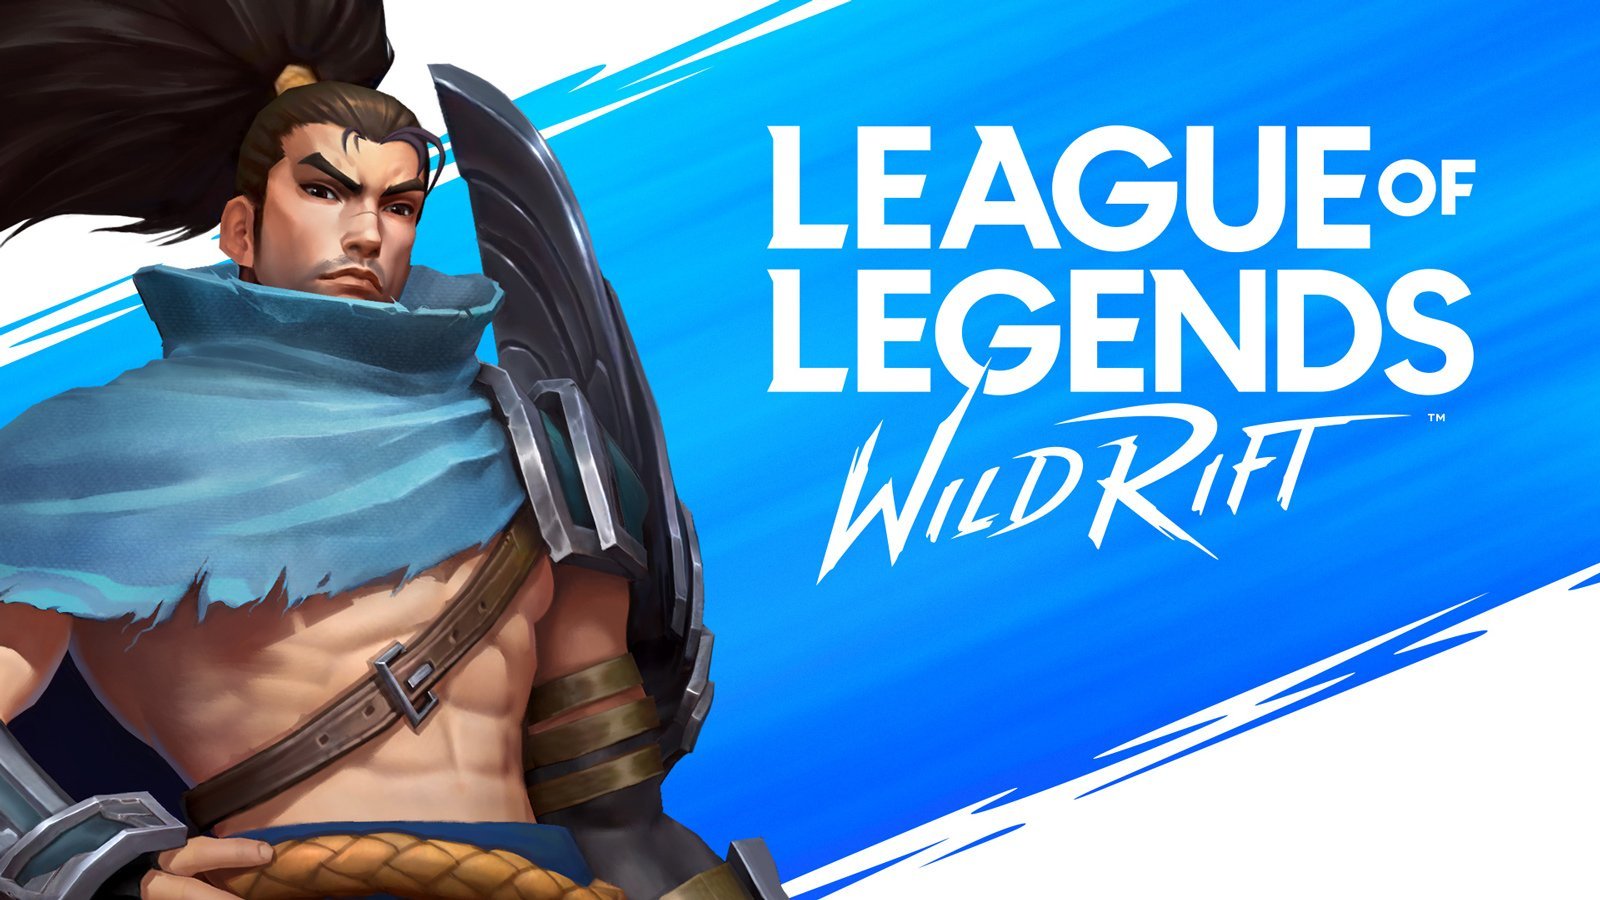 League of Legends: Wild Rift closed beta has been paused